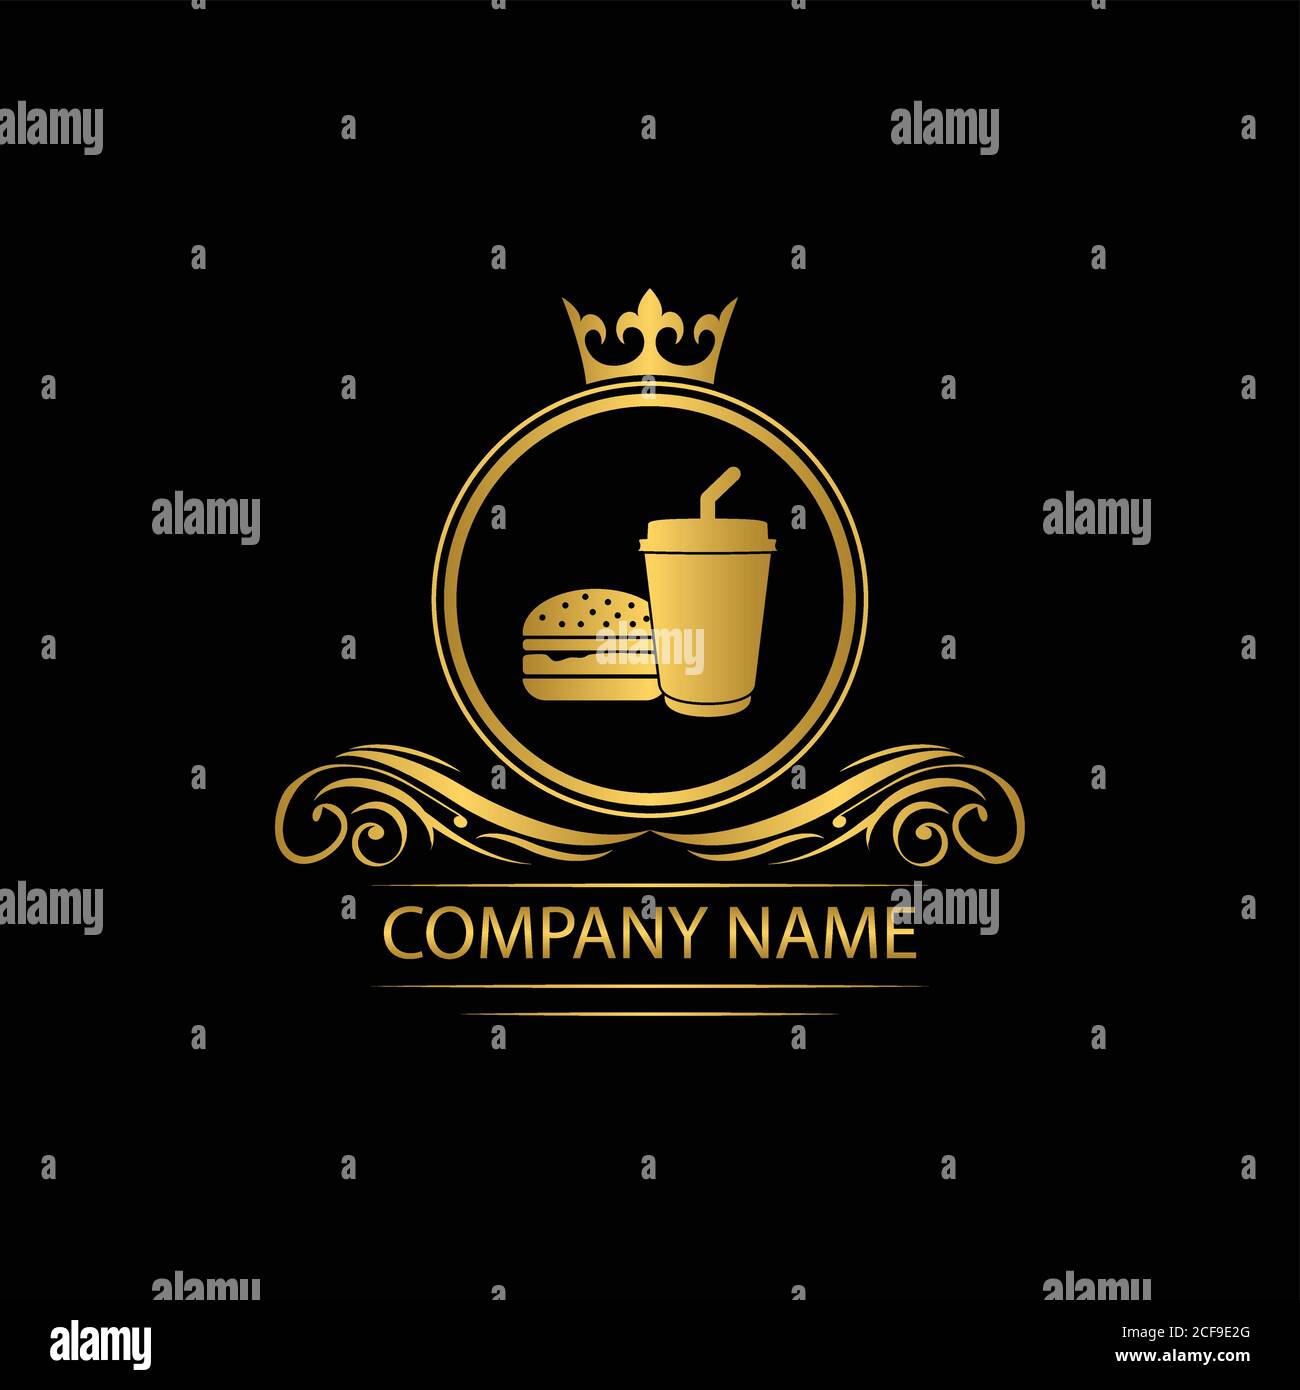 fast food restaurant logo template luxury royal food vector company decorative emblem with crown Stock Vector